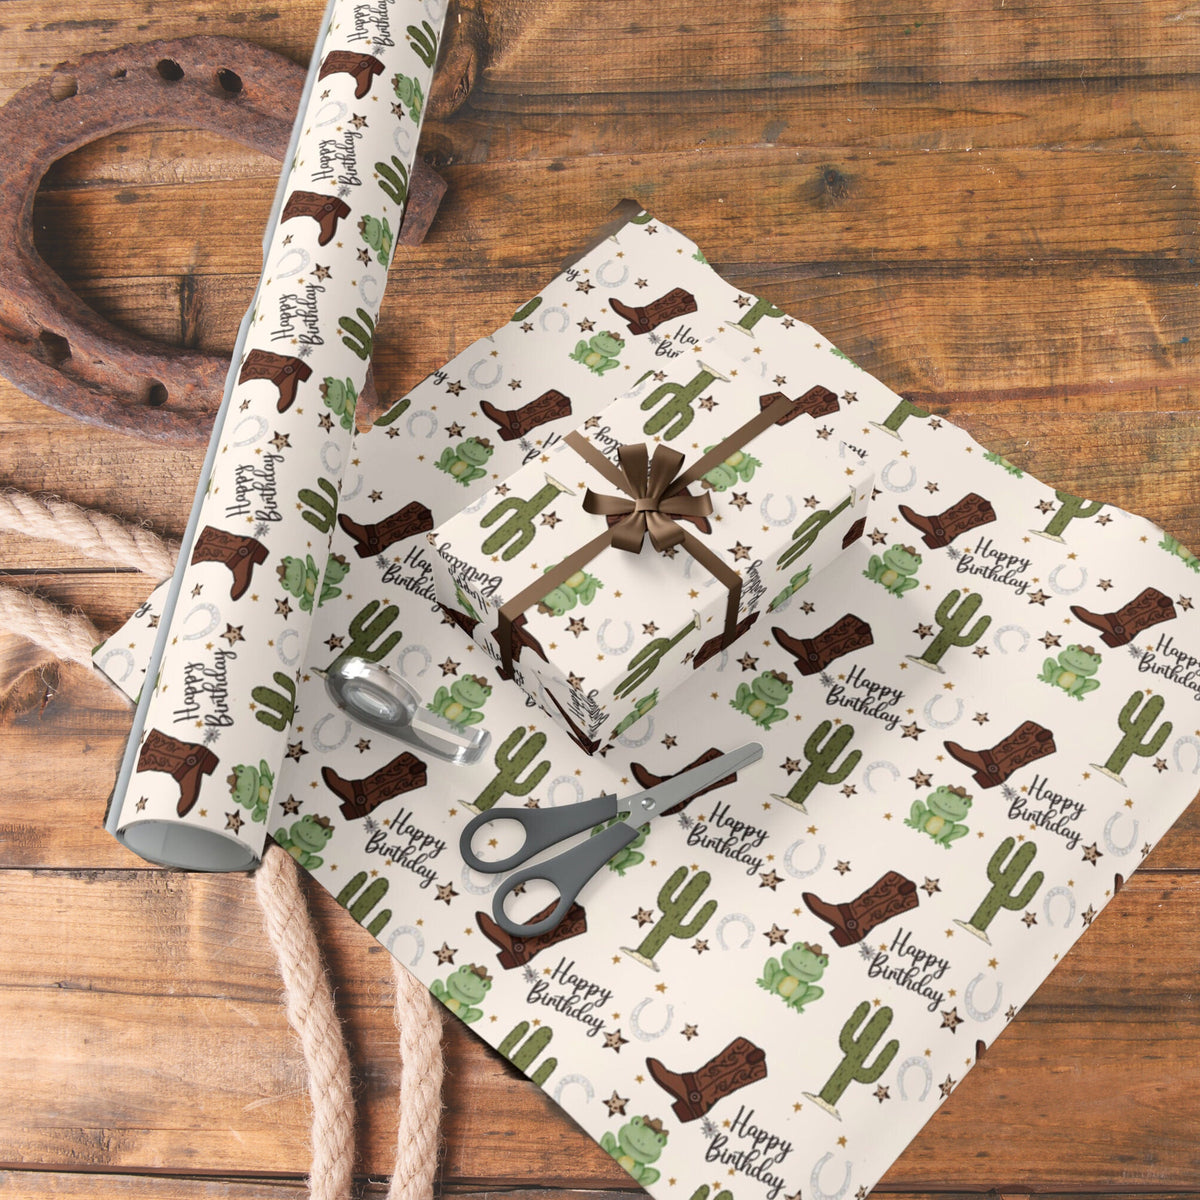 Birthday Wrapping Paper Rodeo Kid Cowboy Boots Gift Wrap Country Cowboy Birthday Paper Child Western Party Decor Cowgirl Boots Gift Paper